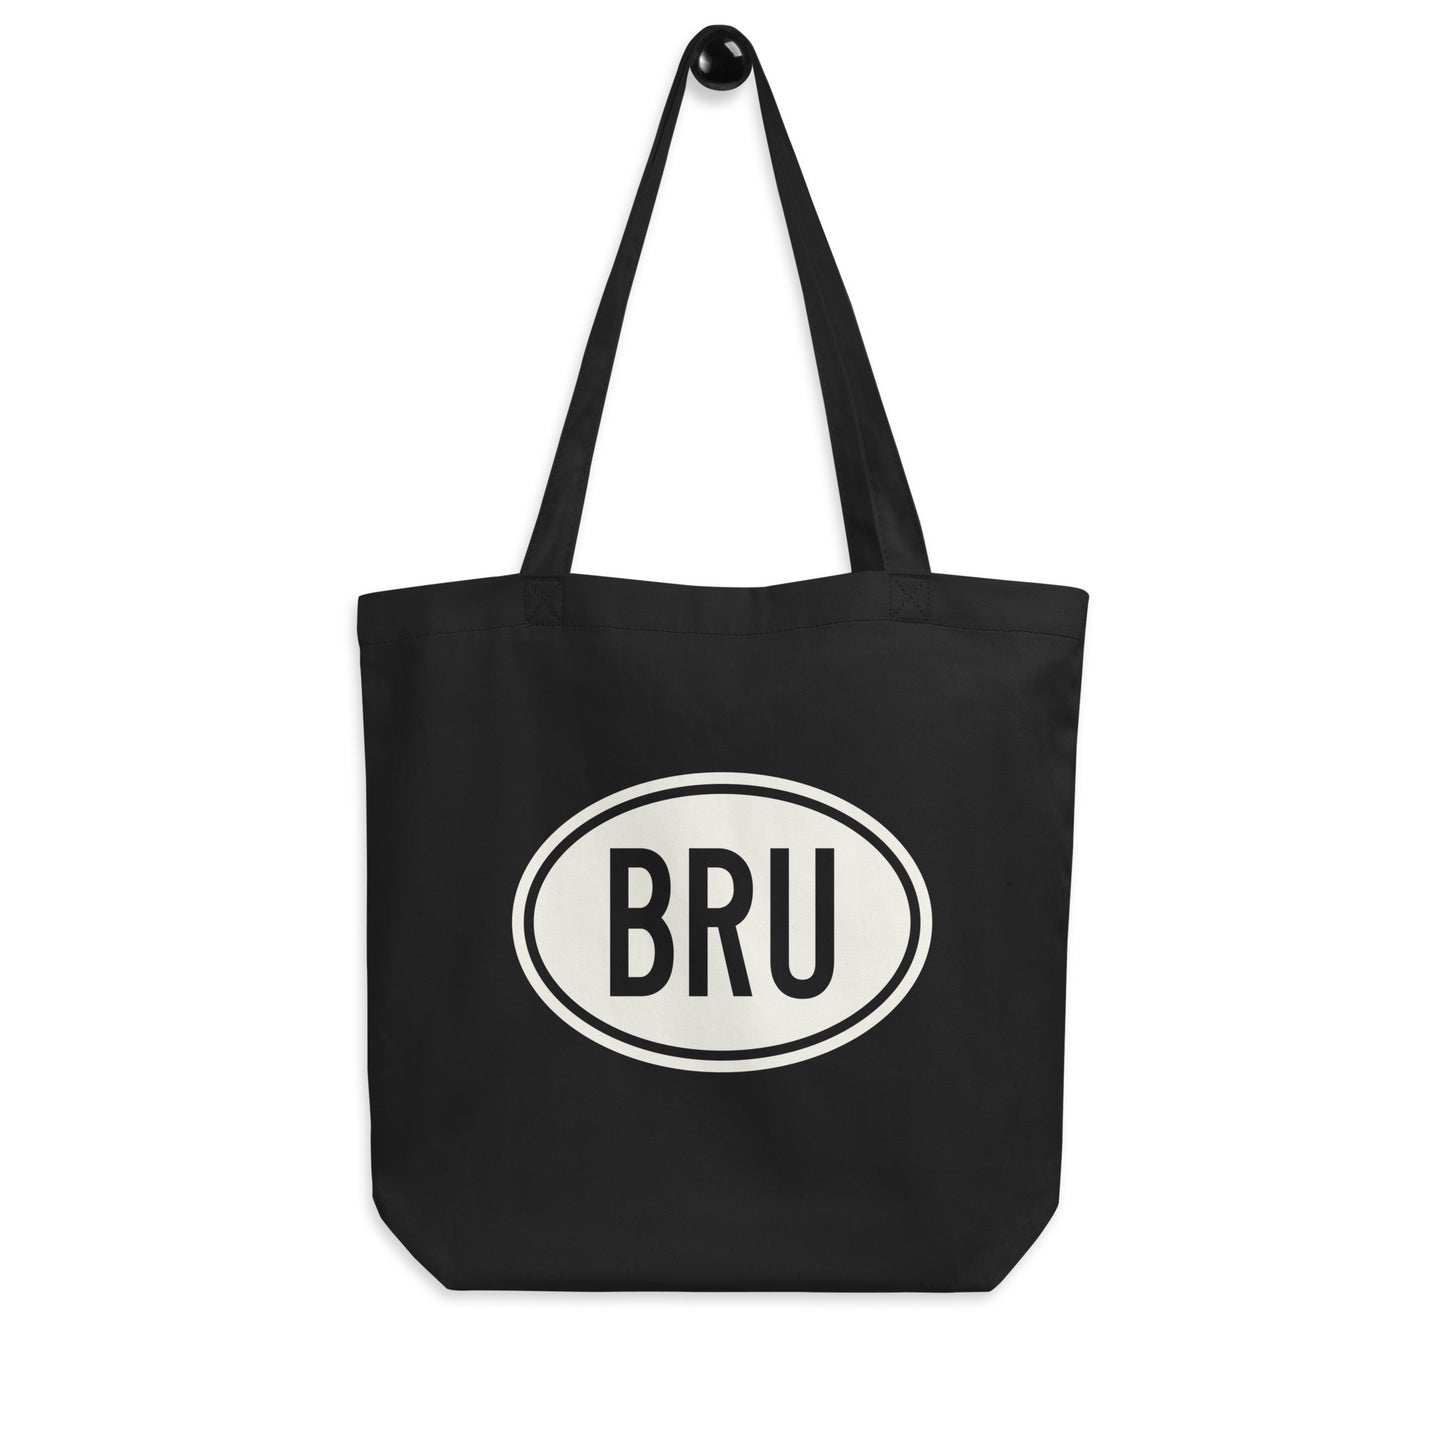 Unique Travel Gift Organic Tote - White Oval • BRU Brussels • YHM Designs - Image 04